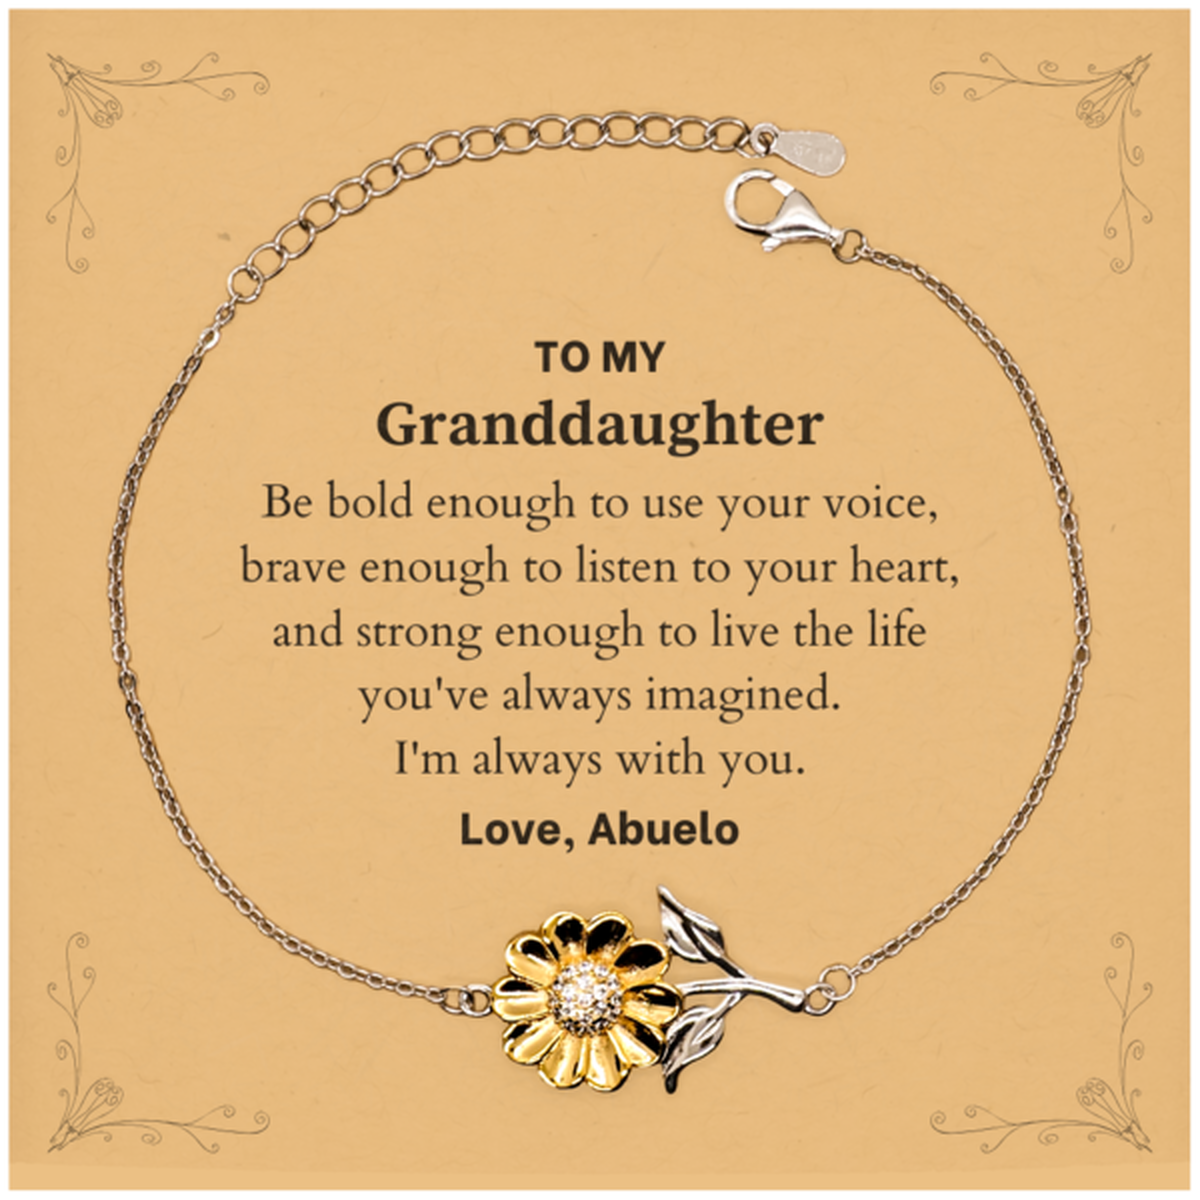 Keepsake Granddaughter Sunflower Bracelet Gift Idea Graduation Christmas Birthday Granddaughter from Abuelo, Granddaughter Be bold enough to use your voice, brave enough to listen to your heart. Love, Abuelo